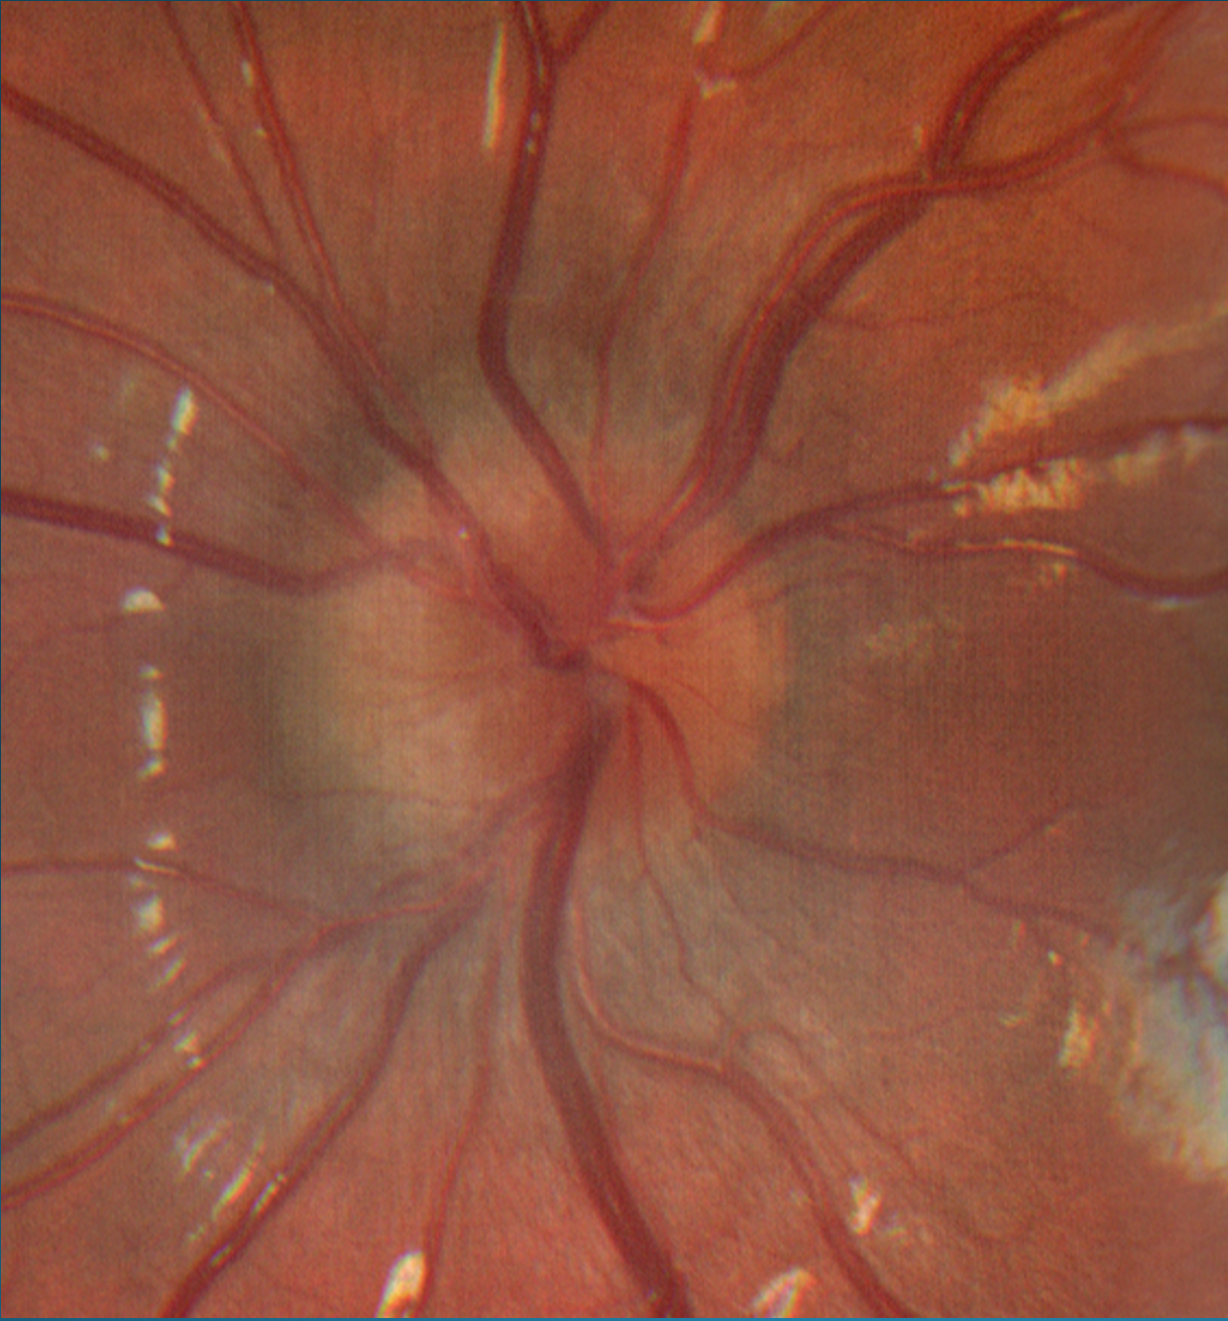 Figure 23 reveals similar presentation for the patient’s left optic nerve as compared to the right eye.